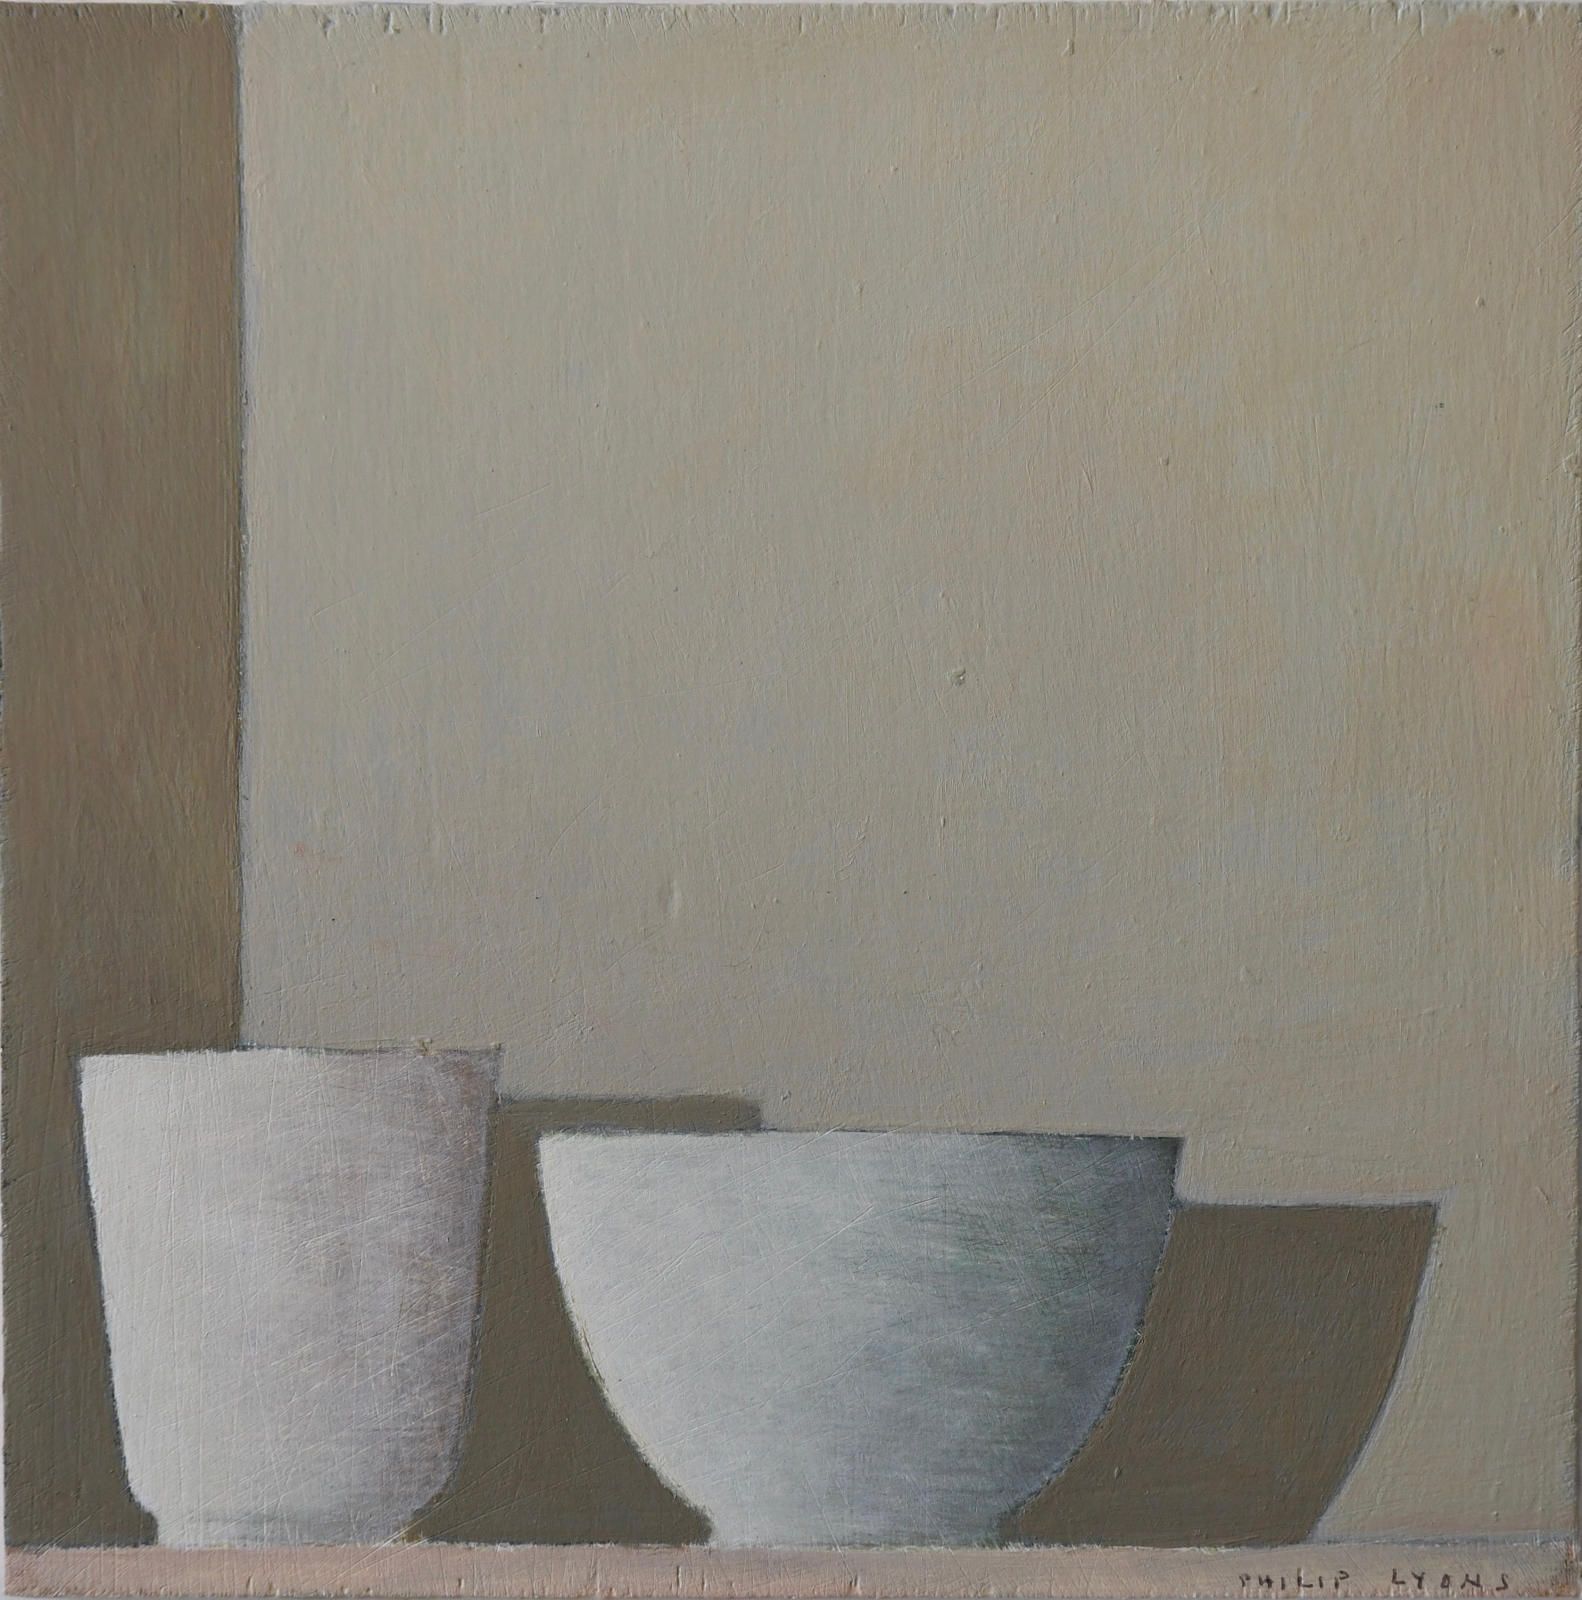 White Vase White Bowl( Morning Light and Shadows ) by Philip Lyons